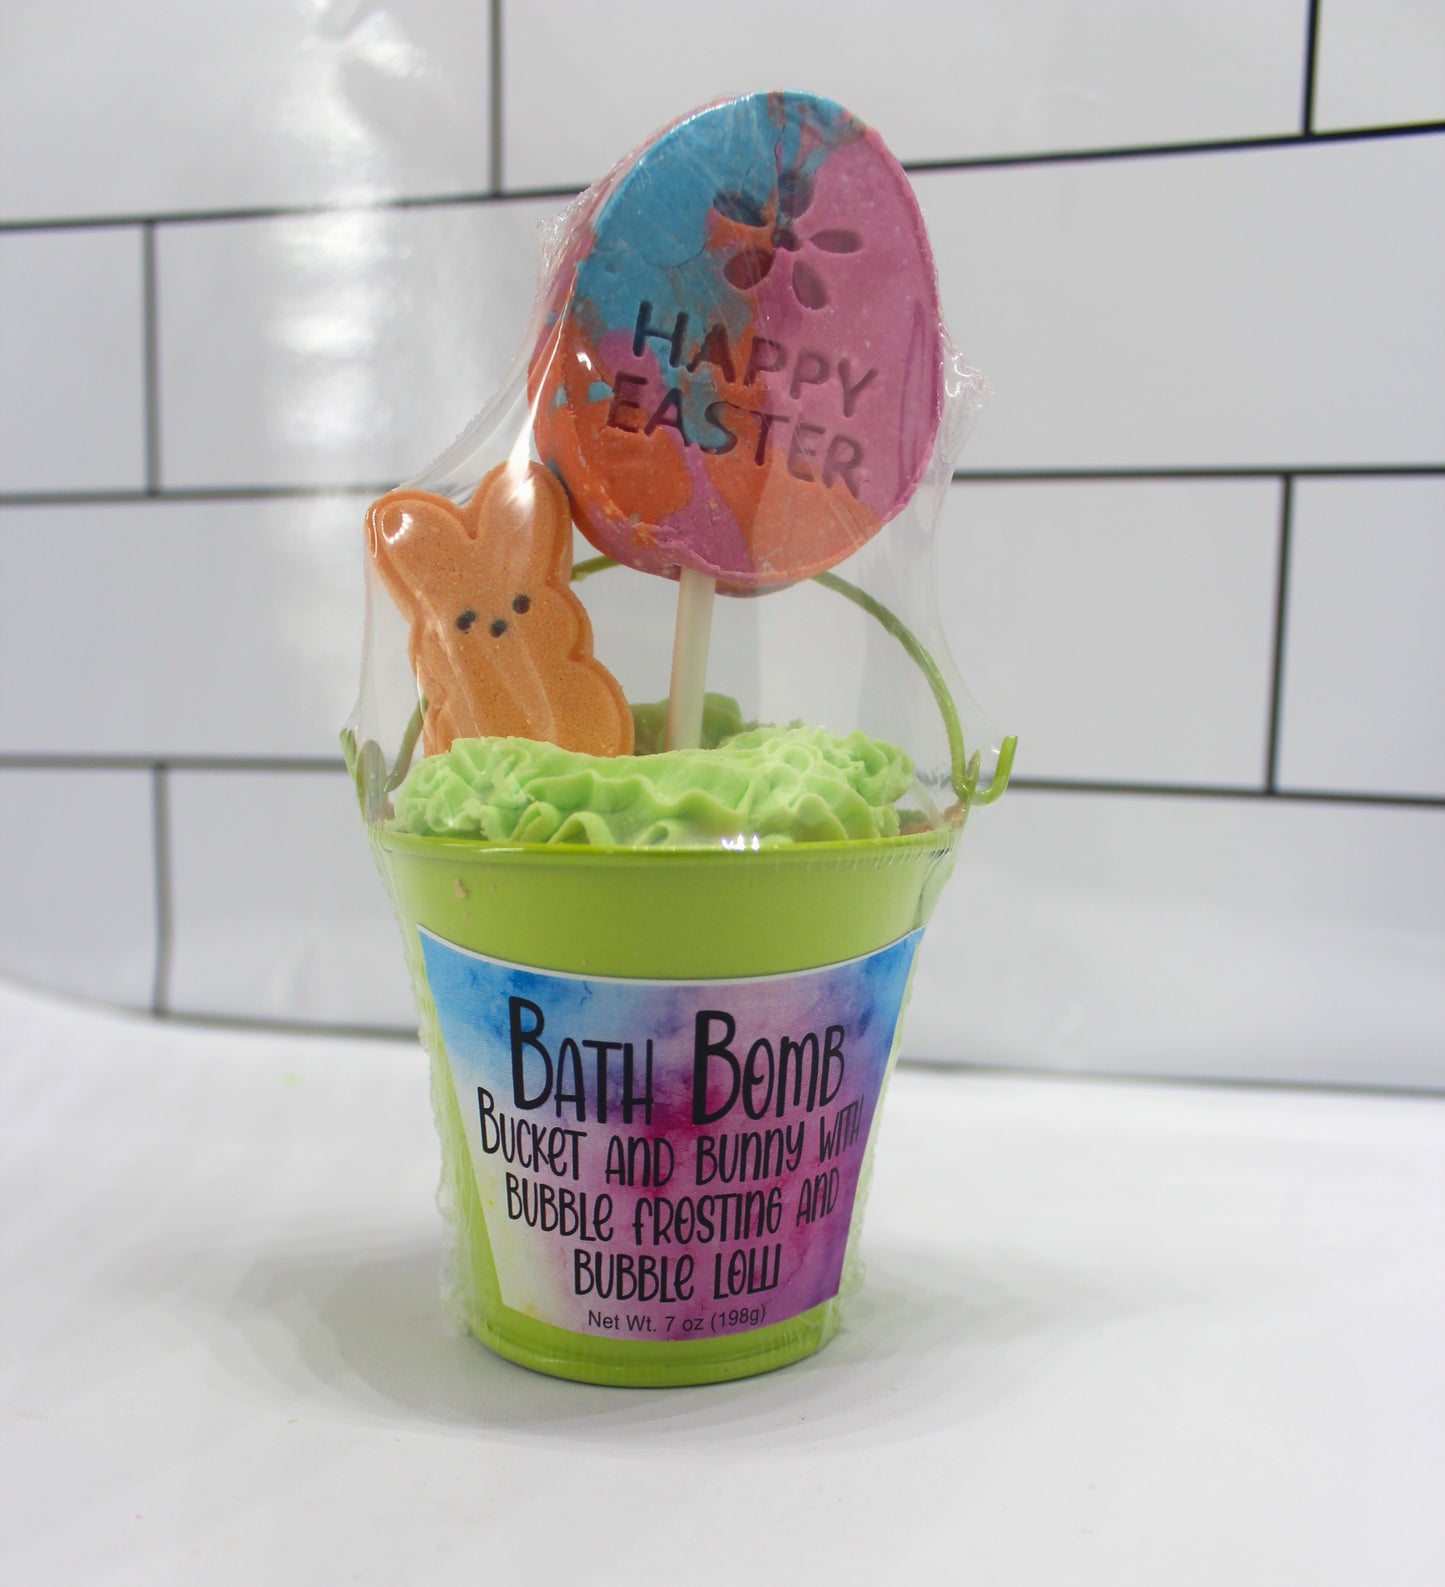 Bath Bomb Bucket and Bunny with Bubble frosting and Bubble Bath Lolli!